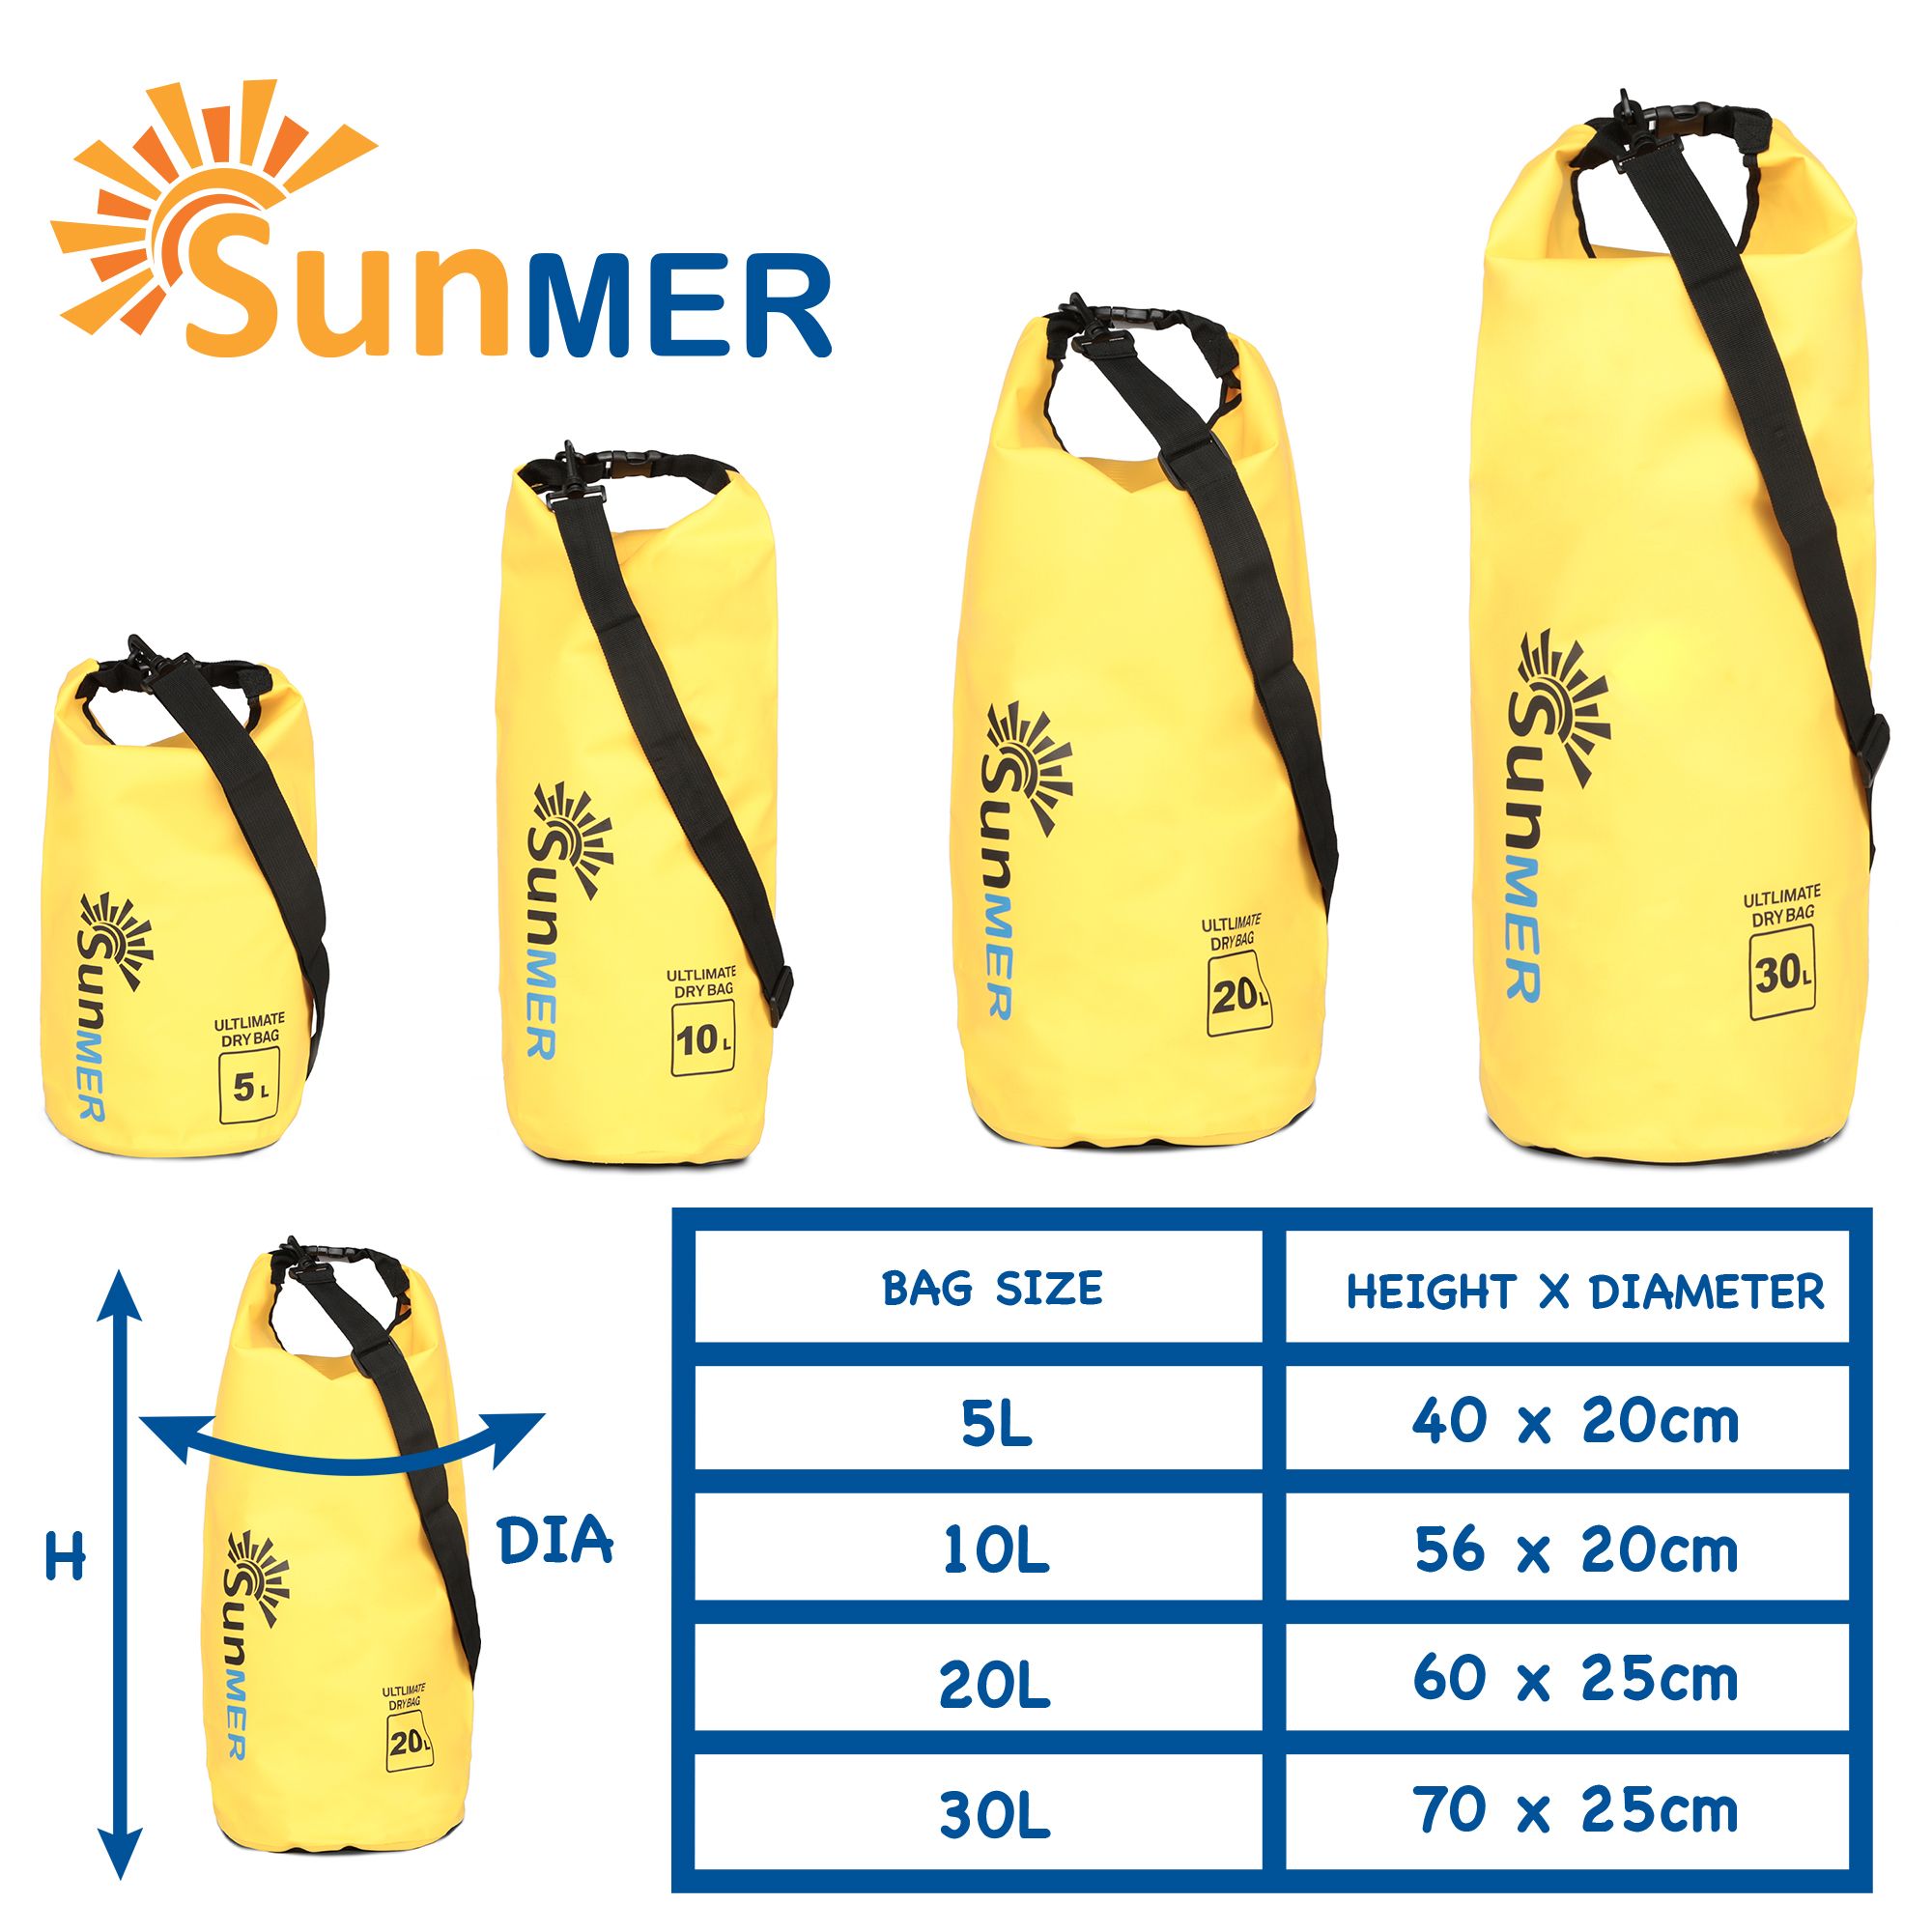 SUNMER 20L Dry Bag With Waterproof Phone Case - Yellow